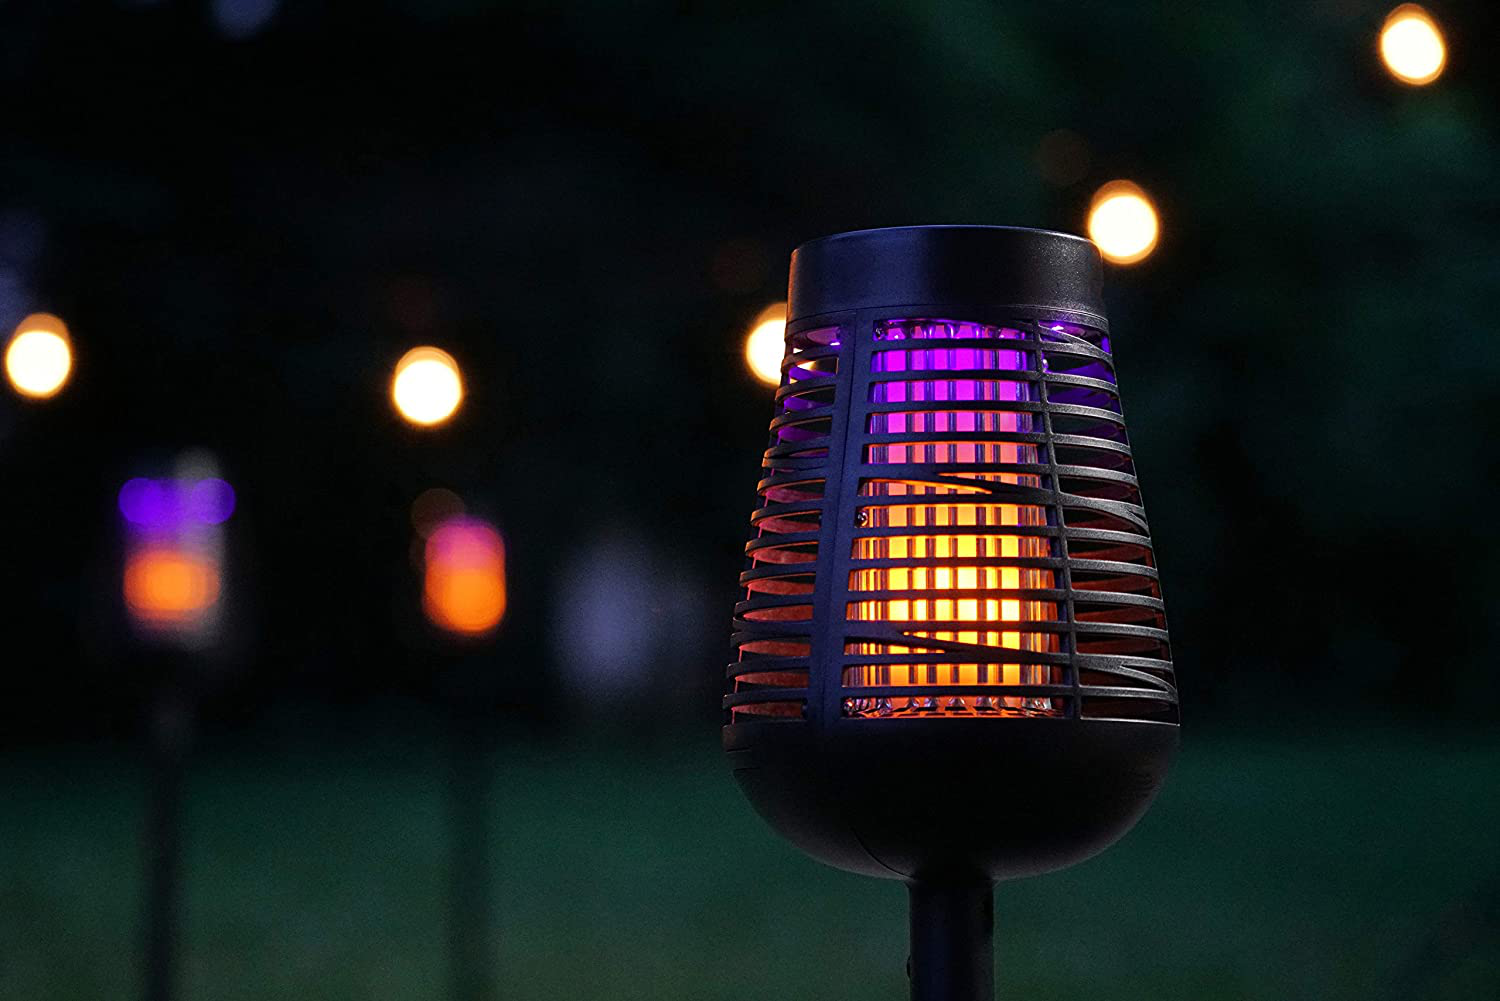 PIC Solar Insect Killer Torch (DFST), Bug Zapper and Accent Light, Kills Bugs on Contact